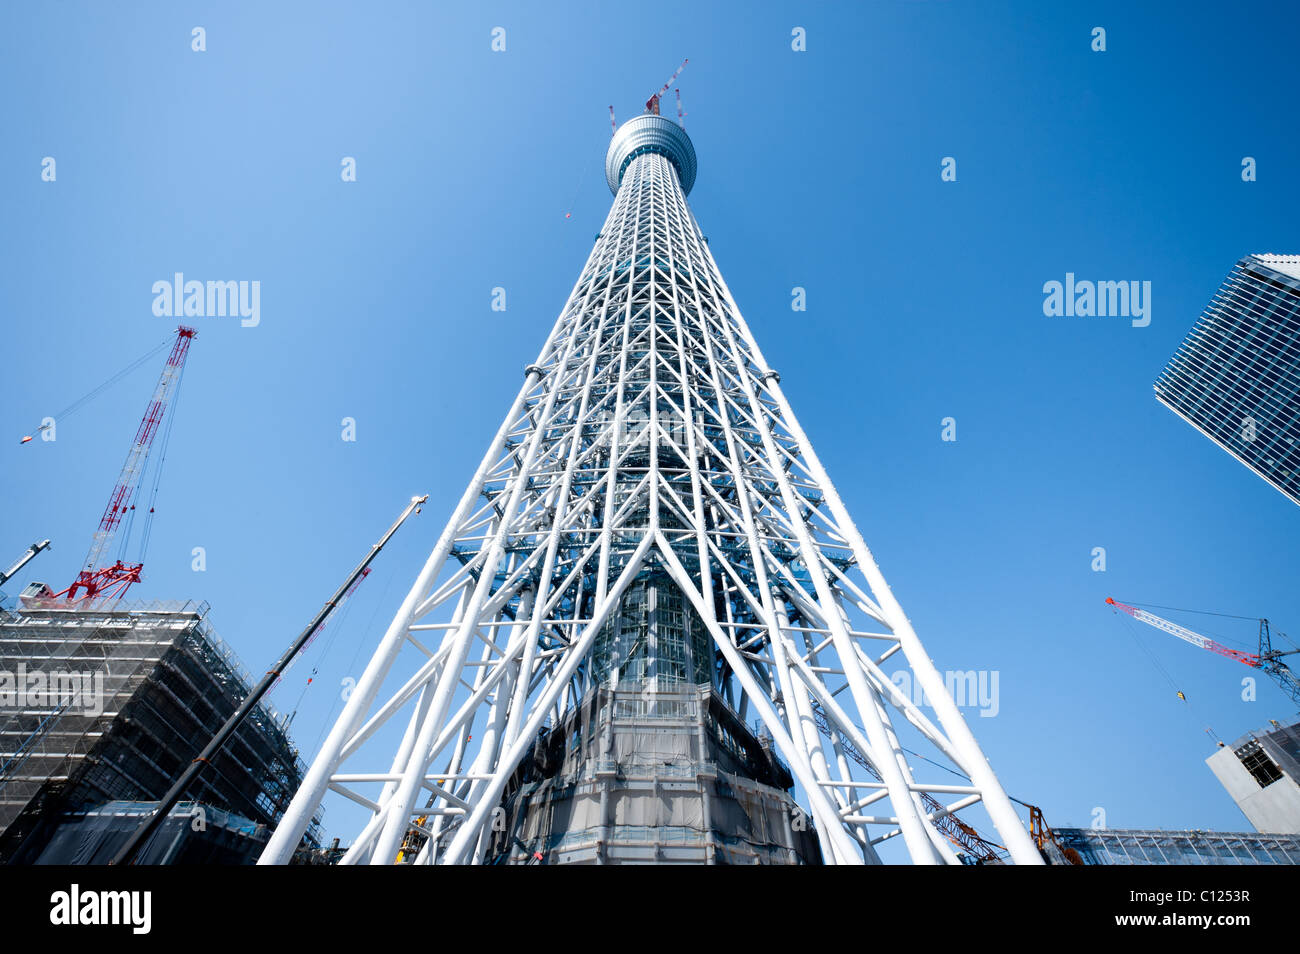 TOKYO, JAPAN - MARCH 3: Tokyo Sky Tree, scheduled for completion in 2012, becomes the world's tallest tower. Stock Photo